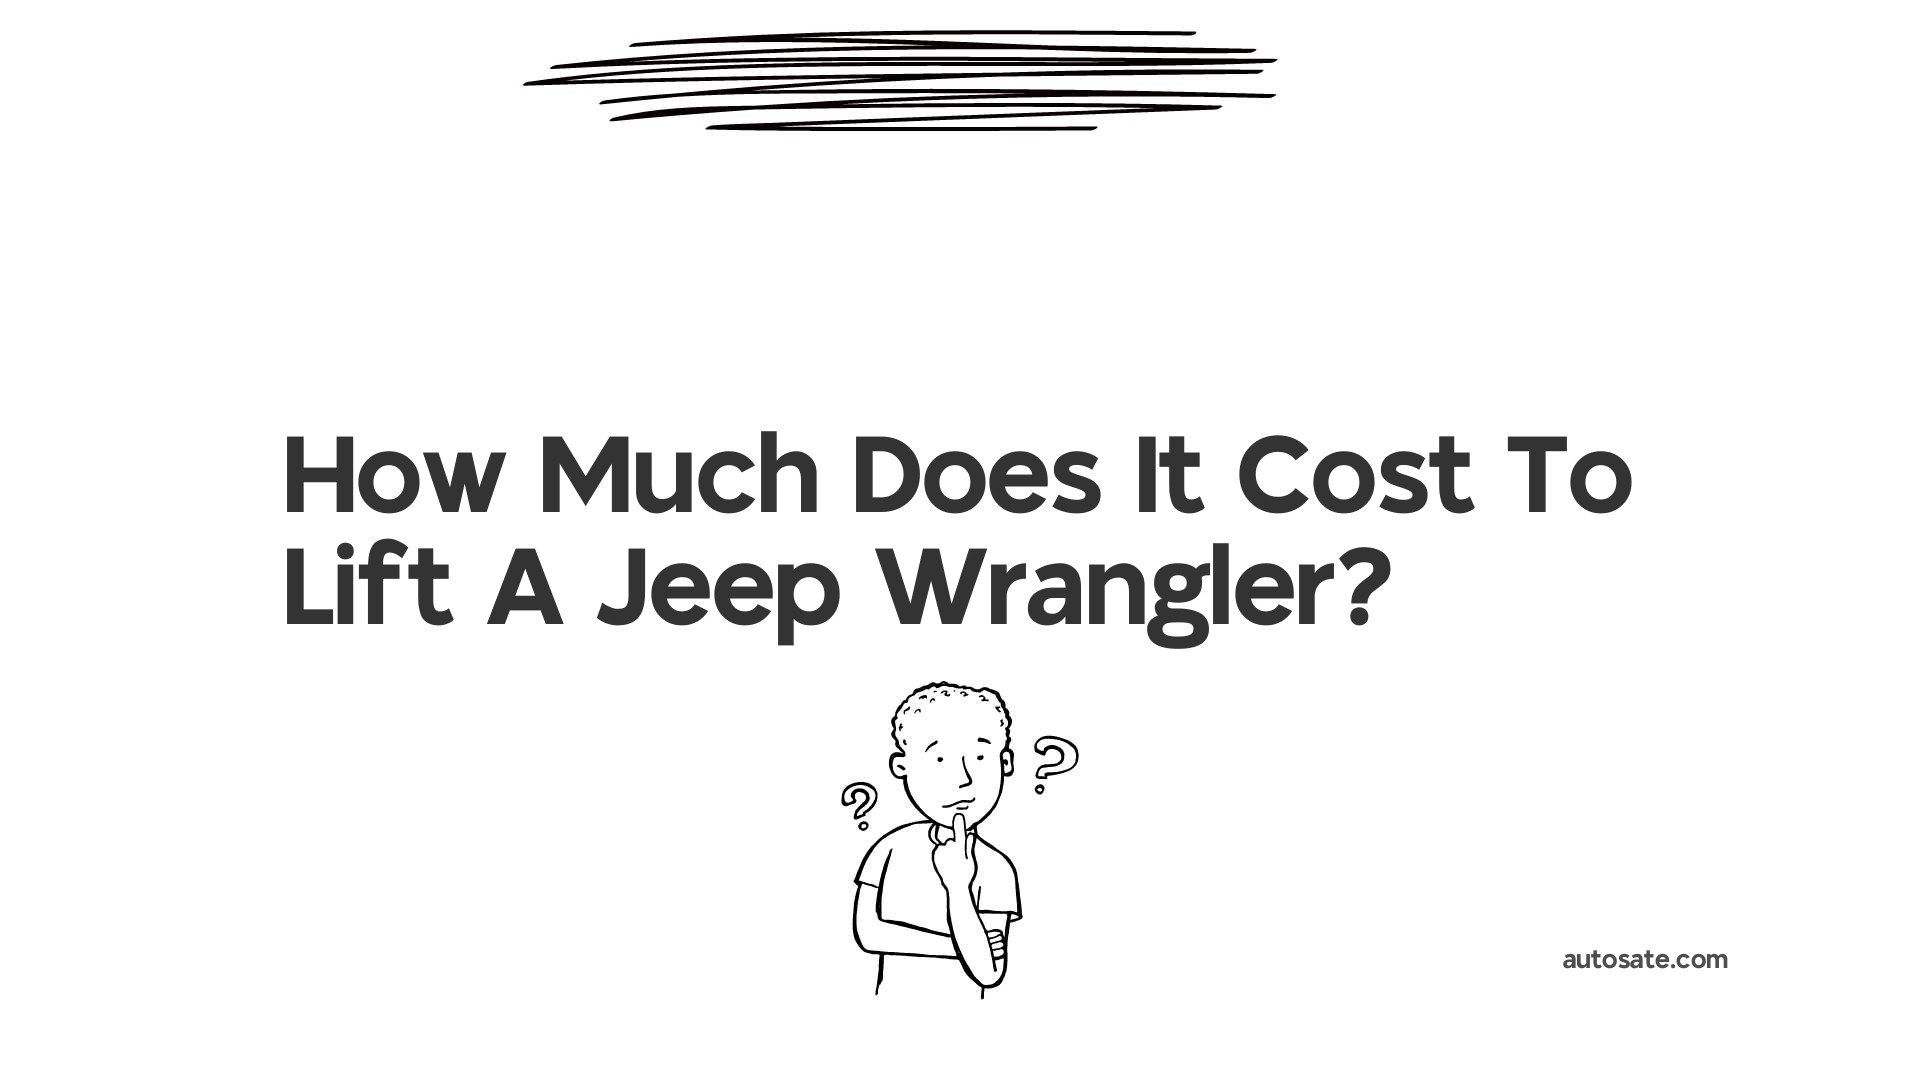 How Much Does It Cost To Lift A Jeep Wrangler?